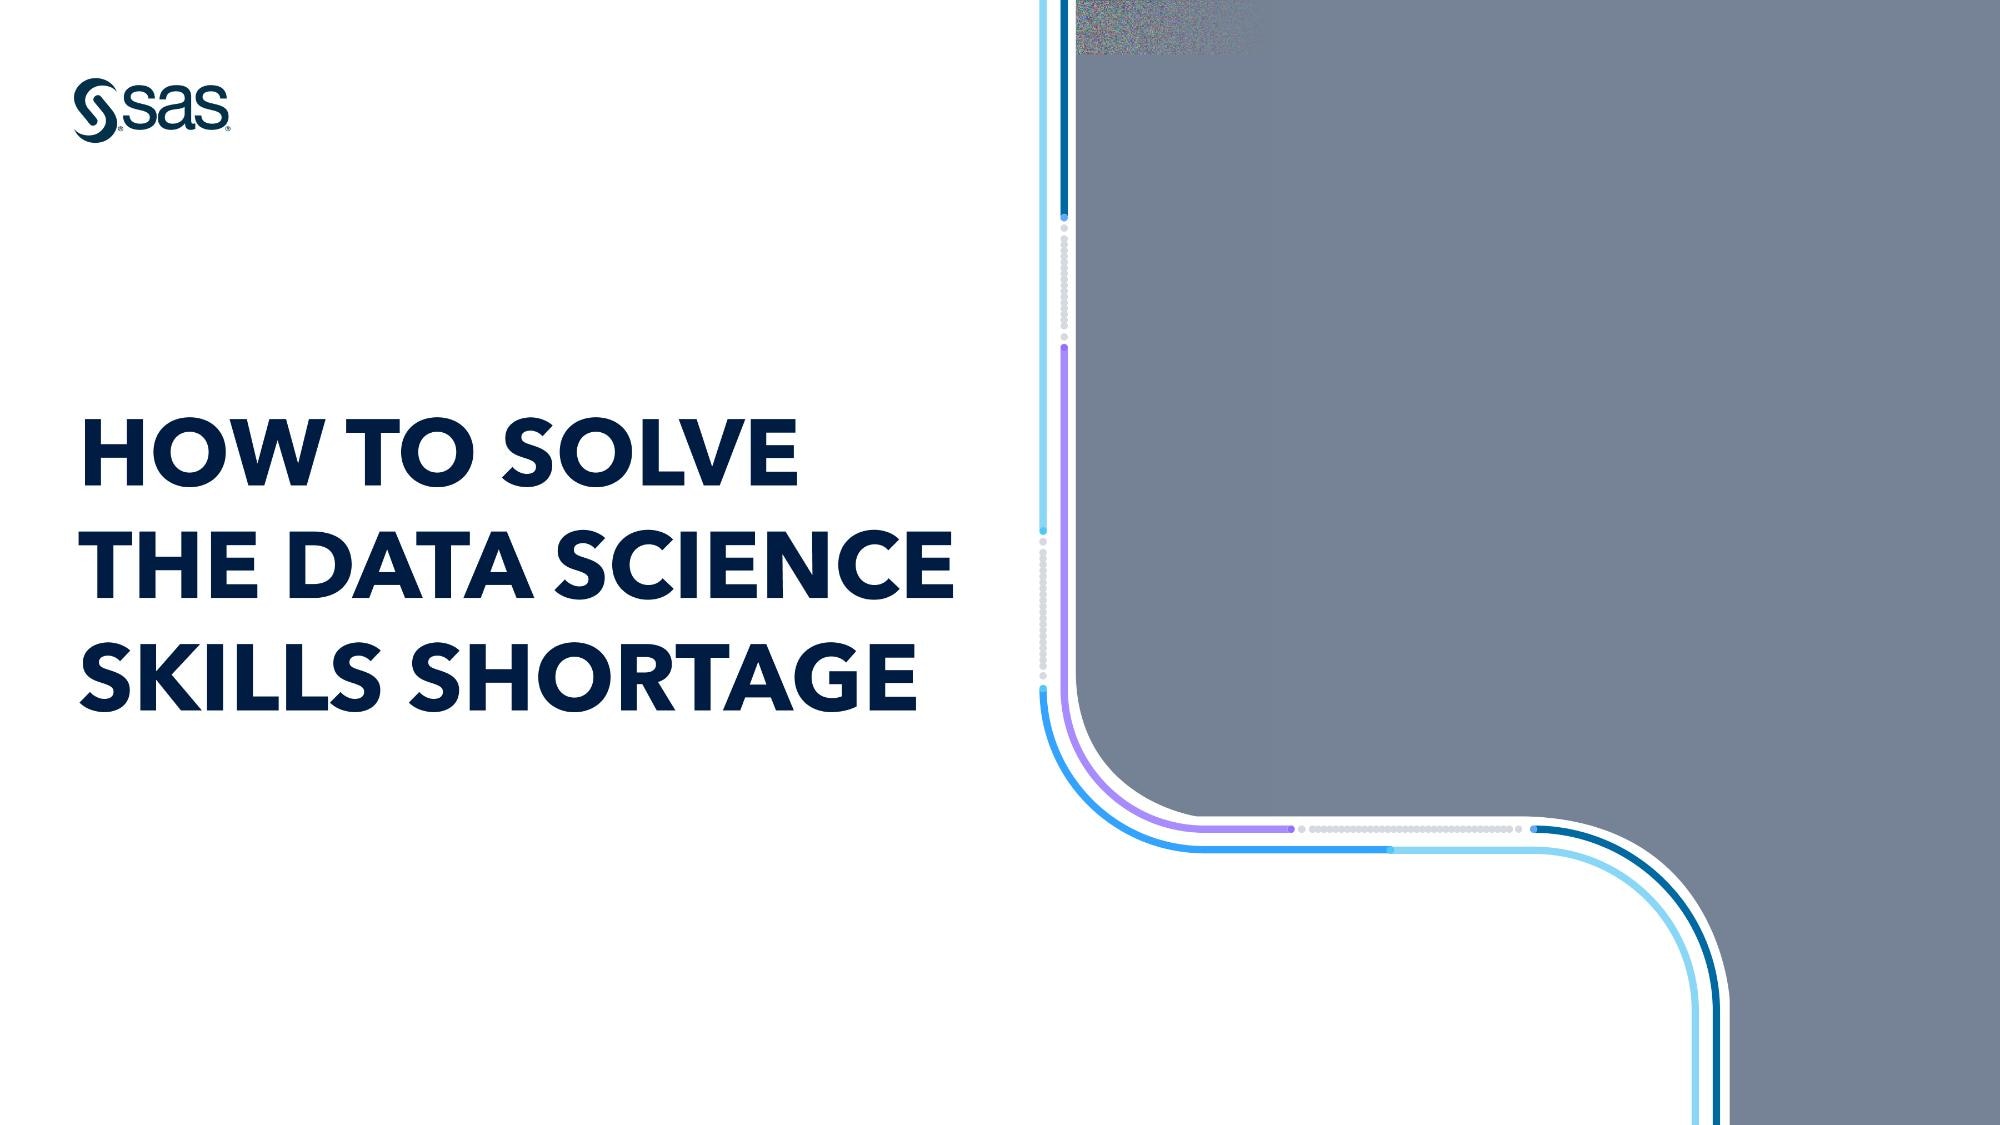 How to Solve the Data Science Skills Shortage